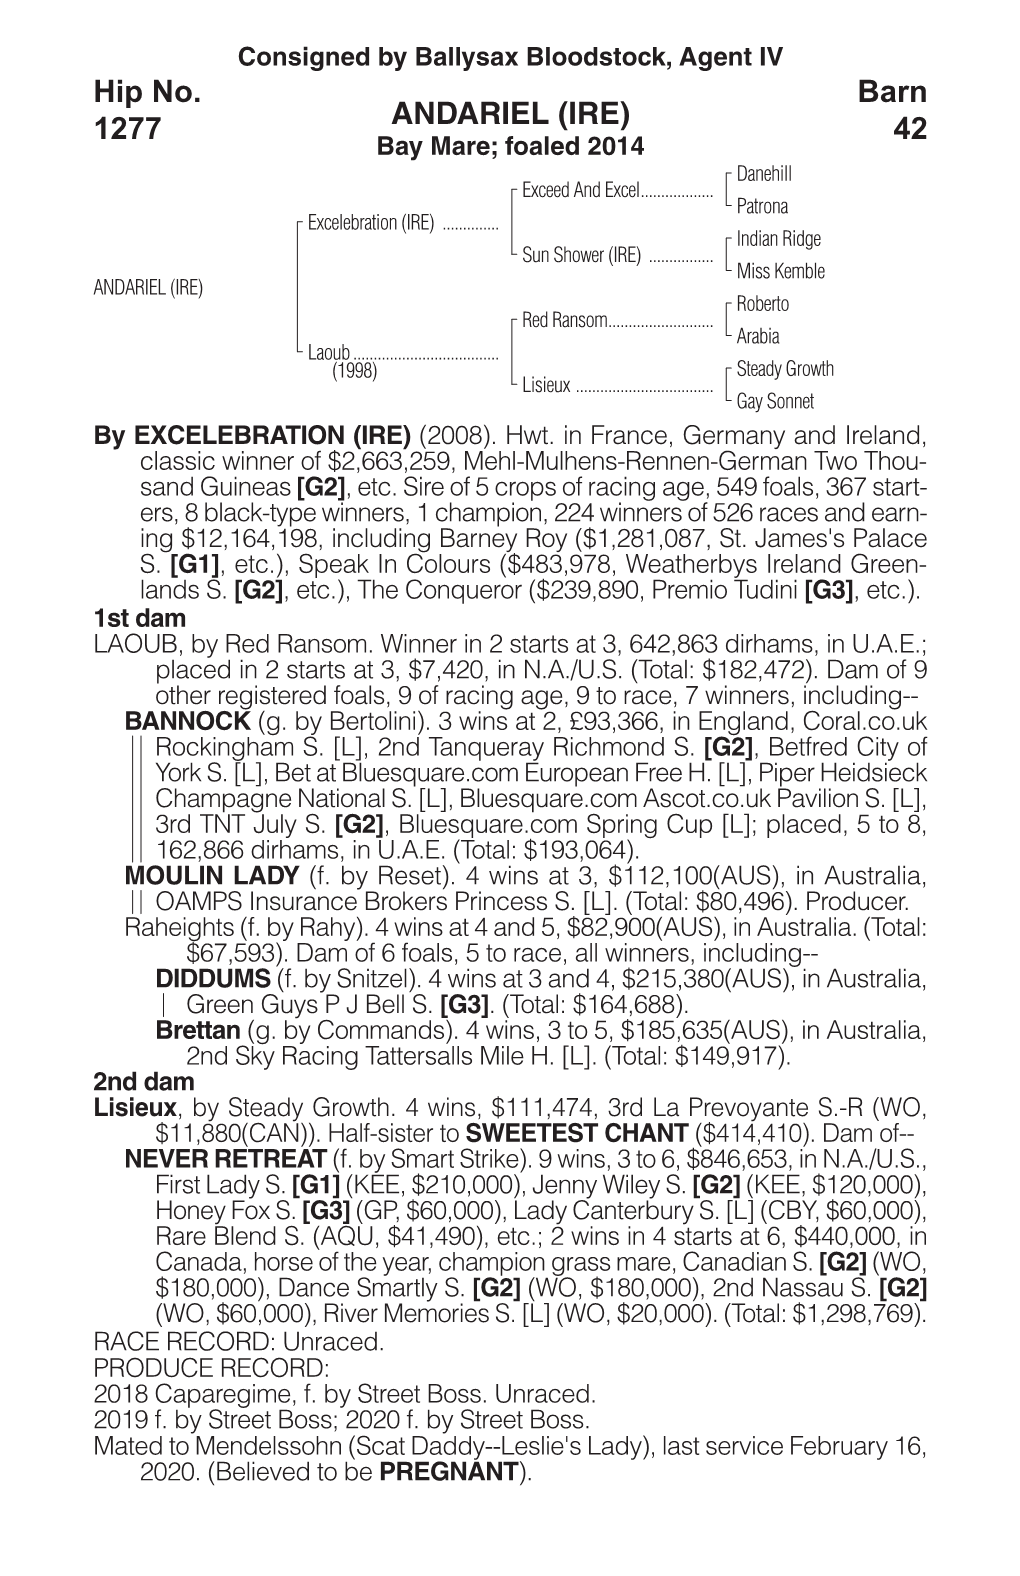 ANDARIEL (IRE) Barn 1277 Bay Mare; Foaled 2014 42 Danehill Exceed and Excel